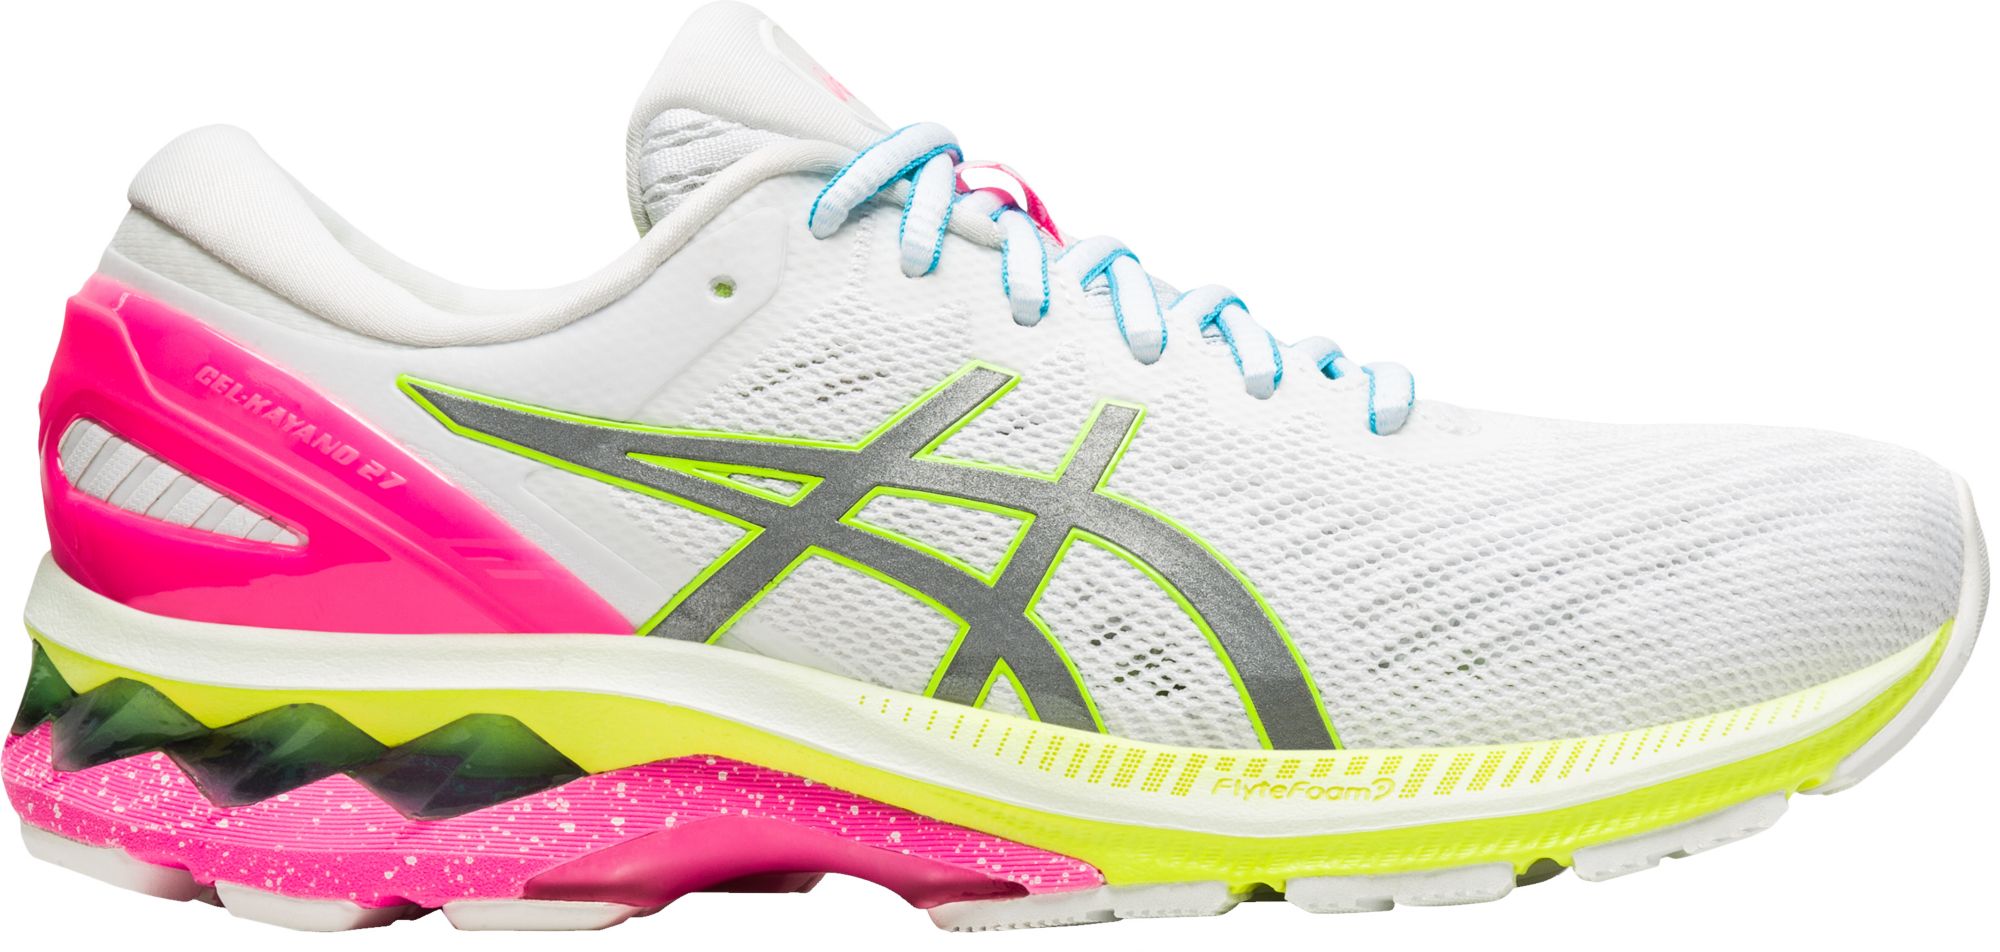 womens asic running shoes